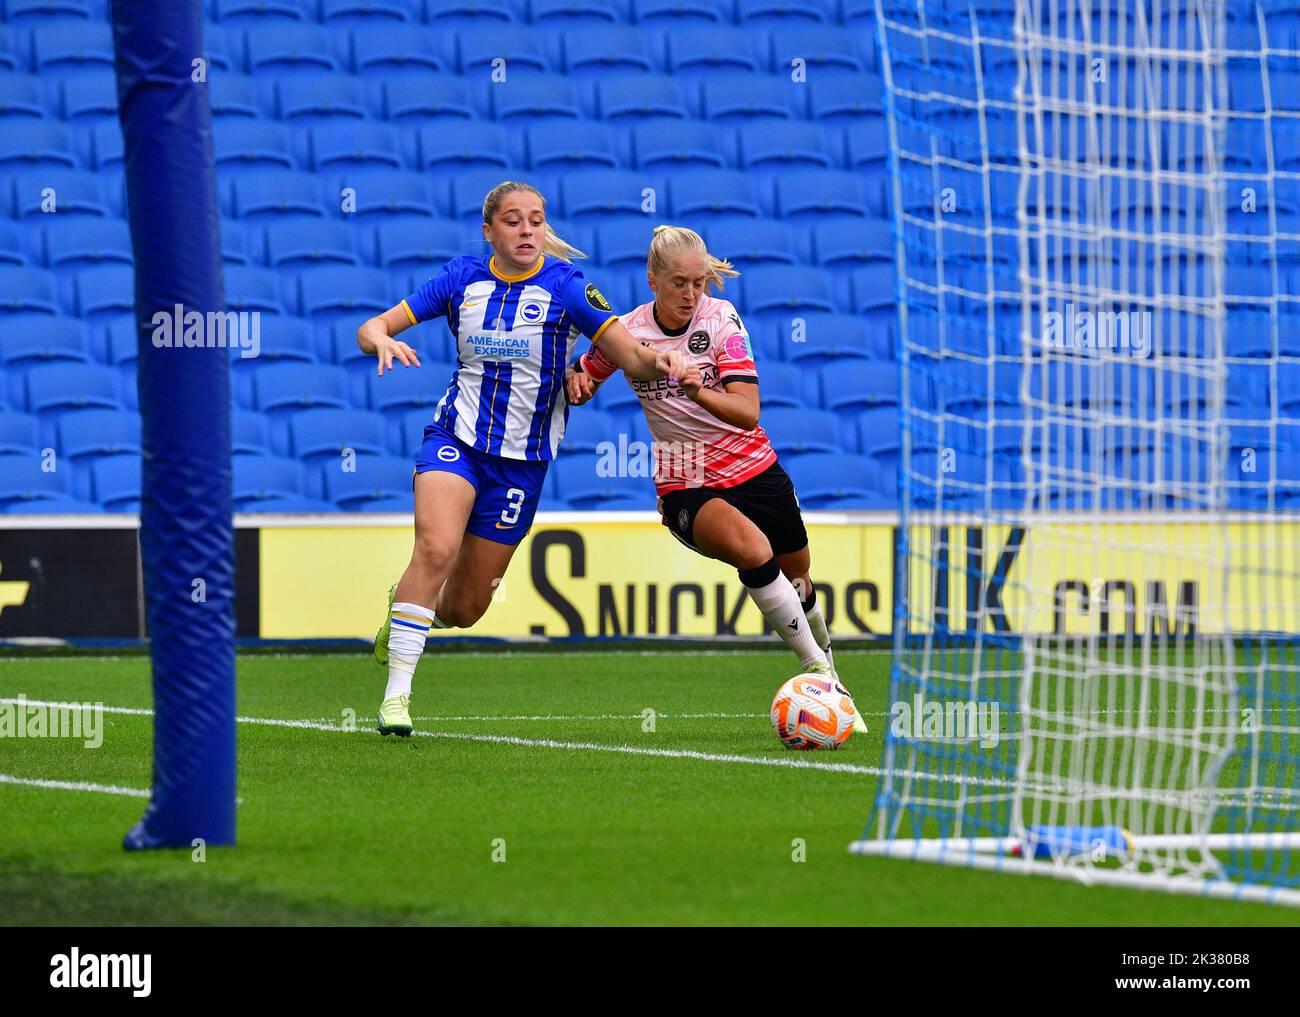 Brighton And Hove, UK. 25th Sep, 2022. Poppy Pattinson of Brighton and Hove Albion during the FA Women's Super League match between Brighton & Hove Albion Women and Reading Women at American Express Community Stadium on September 25th 2022 in Brighton and Hove, United Kingdom. (Photo by Jeff Mood/phcimages.com) Credit: PHC Images/Alamy Live News Stock Photo